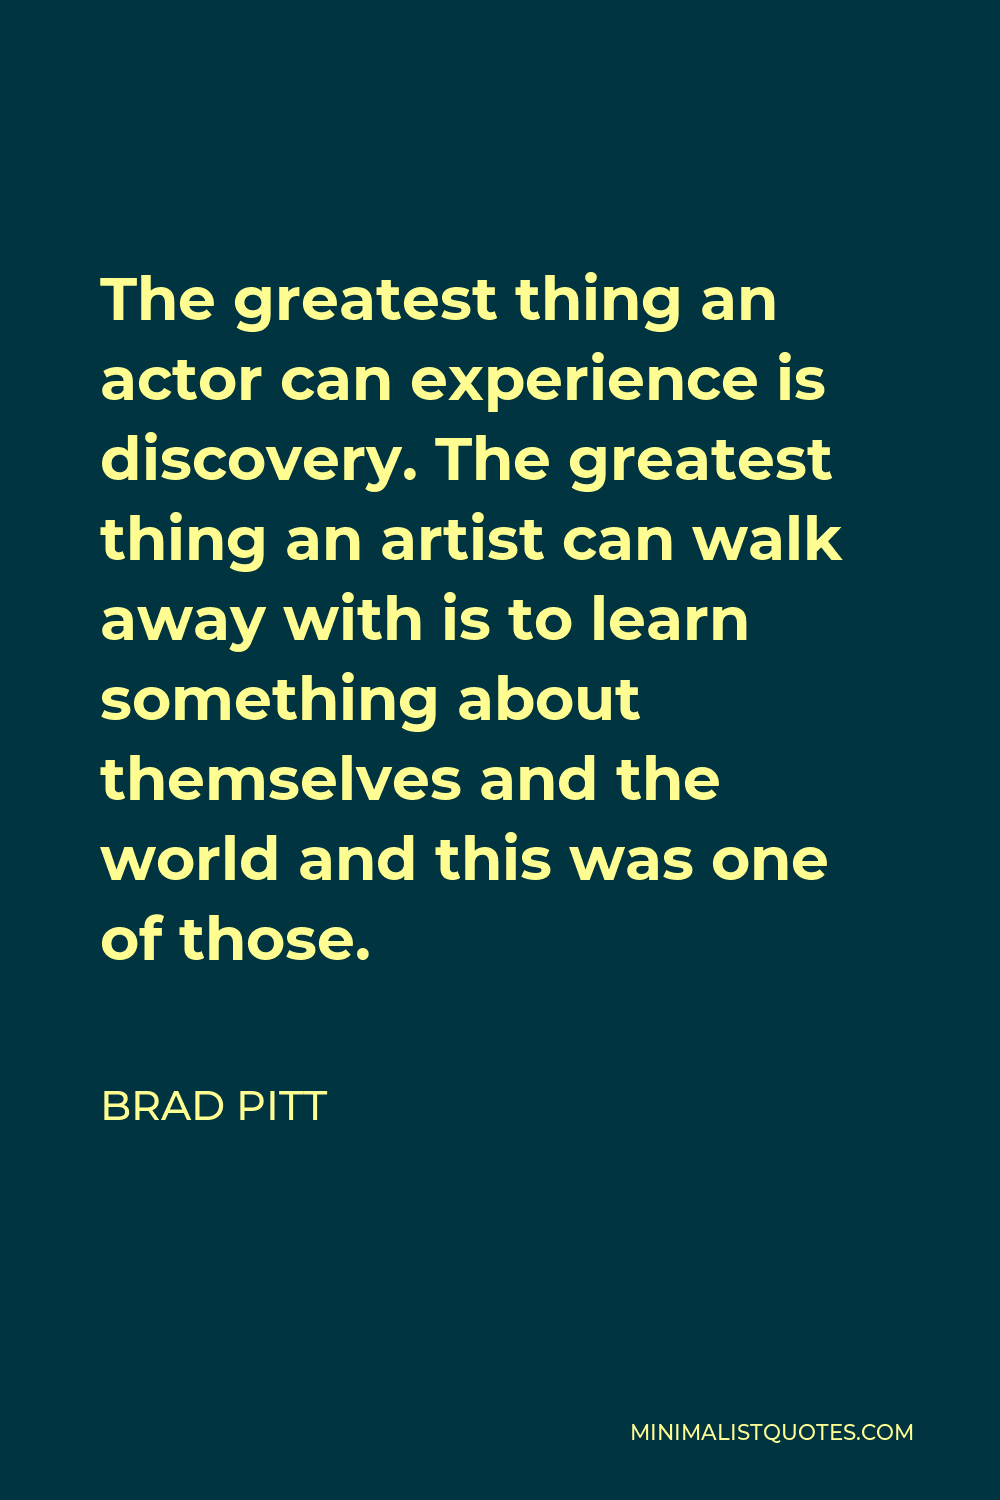 Brad Pitt Quote - The greatest thing an actor can experience is discovery. The greatest thing an artist can walk away with is to learn something about themselves and the world and this was one of those.